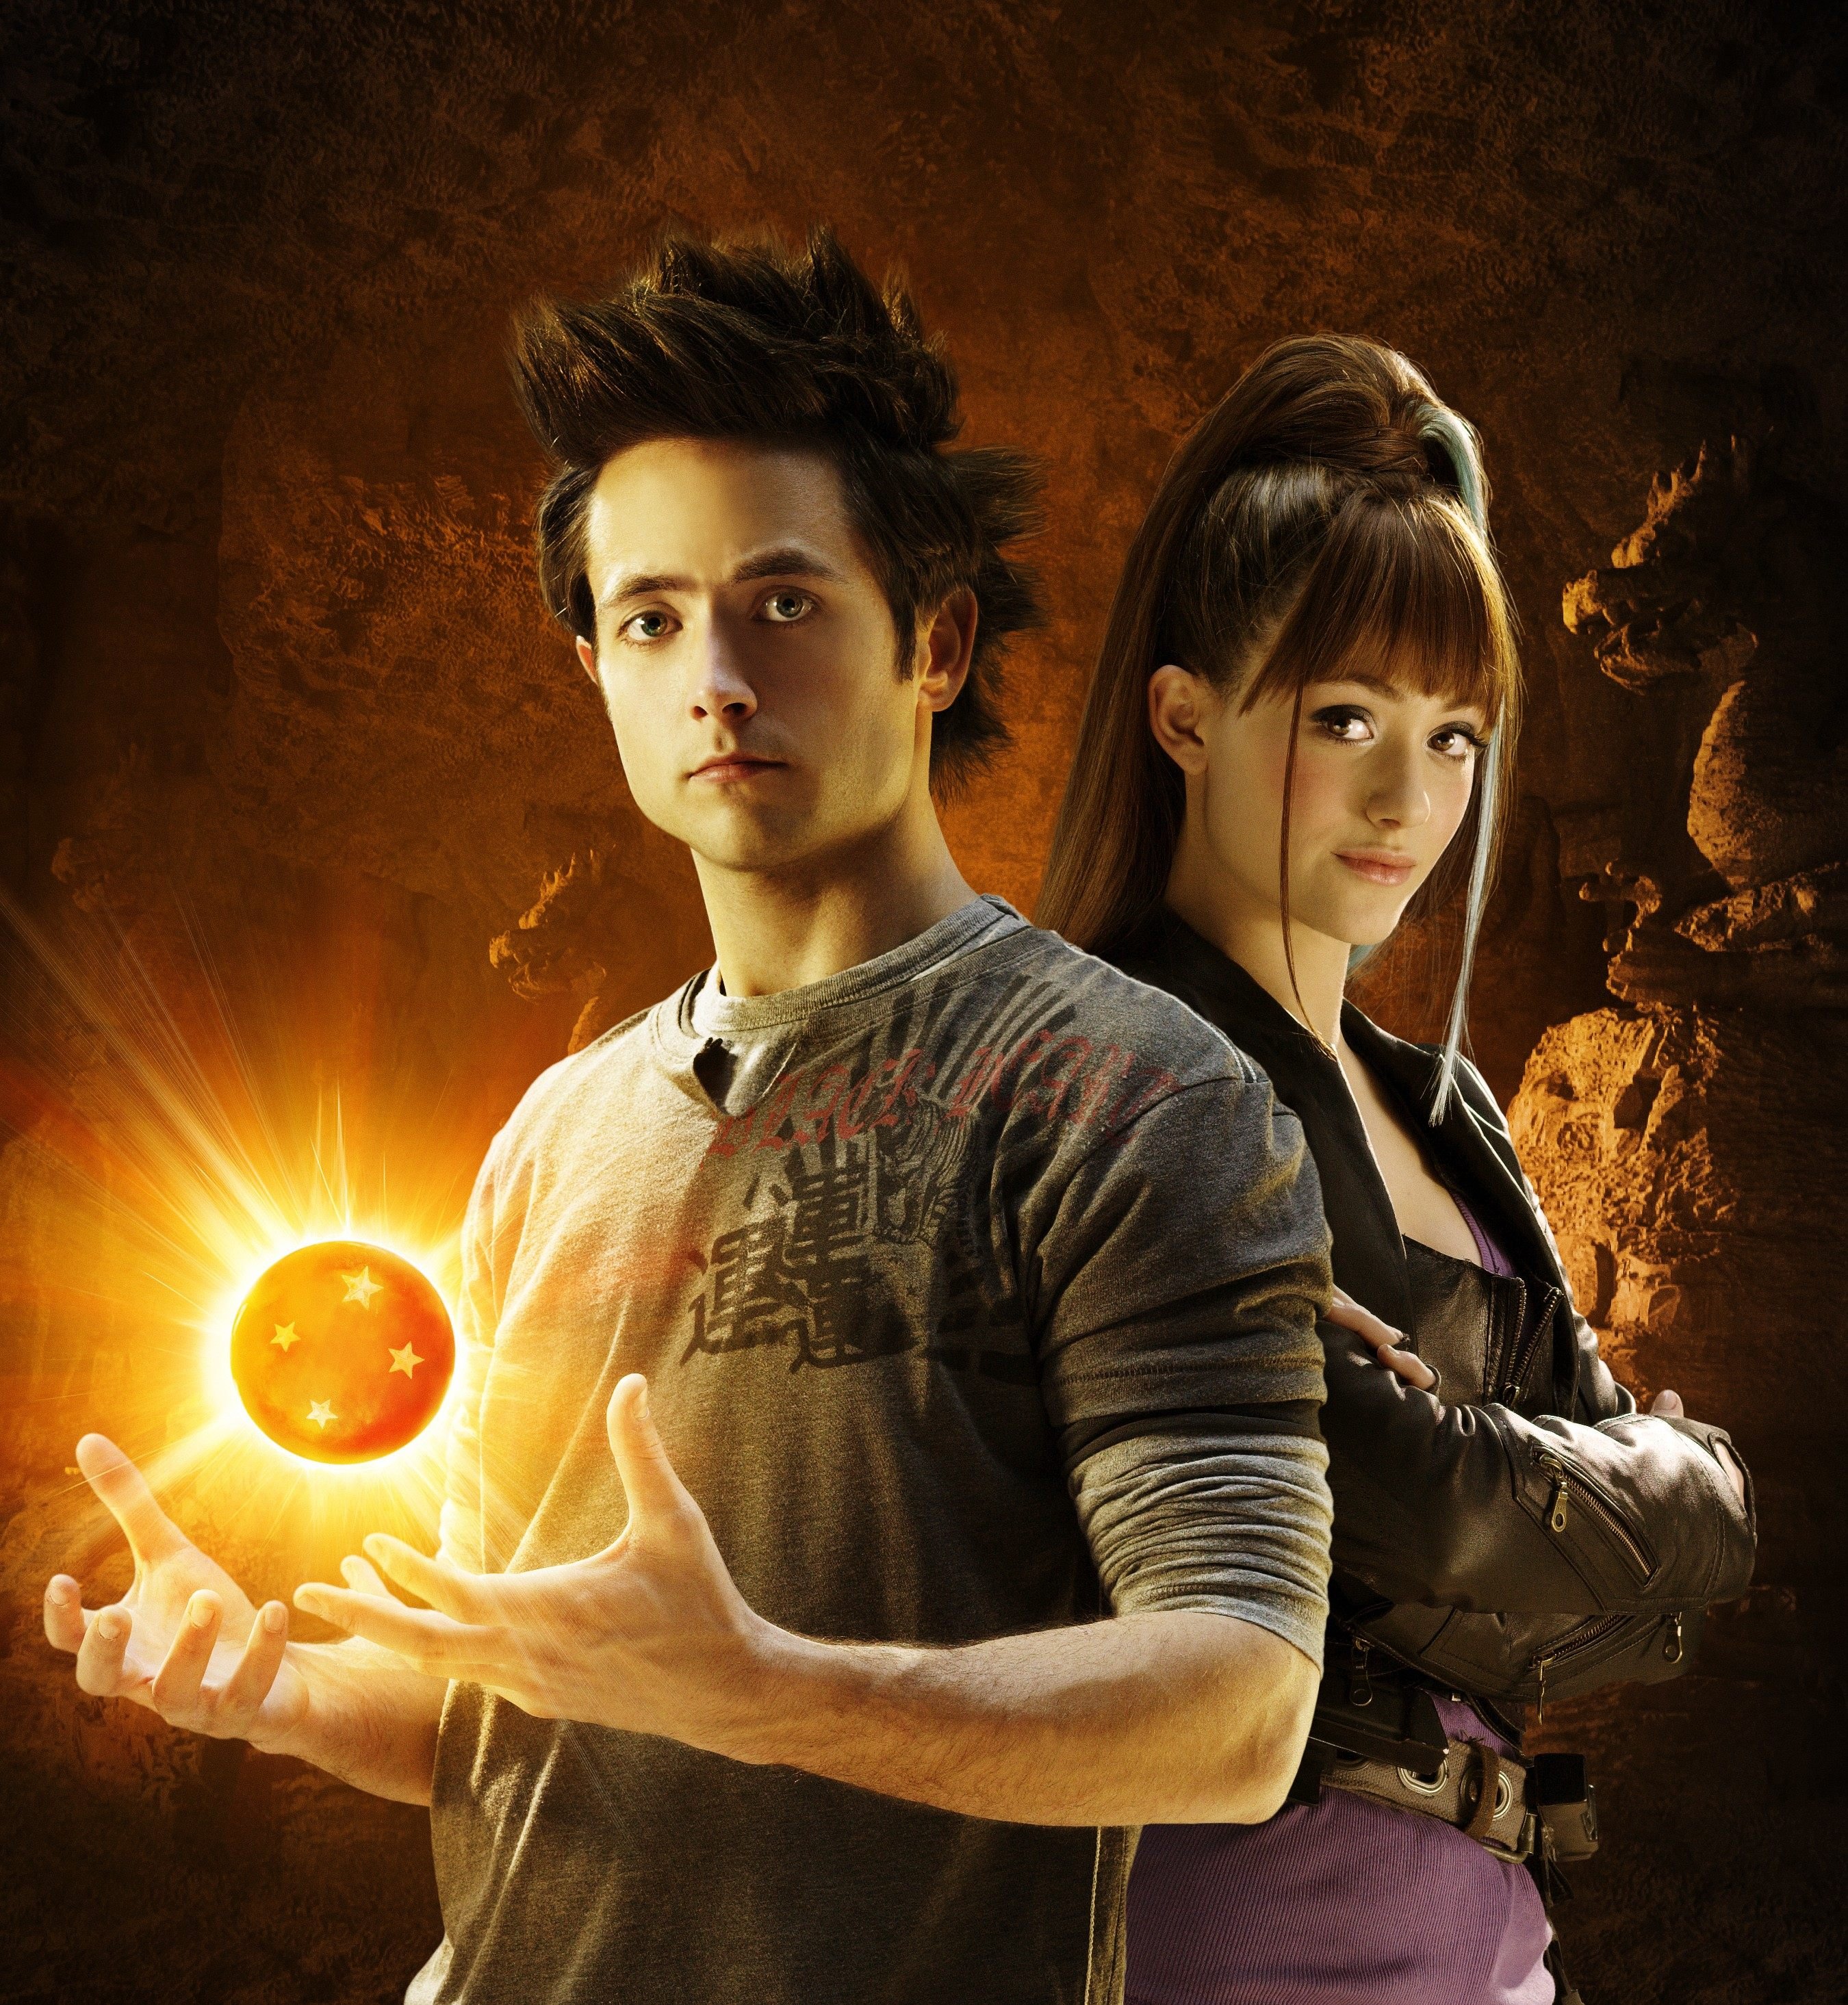 Justin Chatwin and Emmy Rossum in Dragonball Evolution, the laughably bad 2009 movie adaptation of Akira Toriyama’s iconic Dragon Ball manga series.